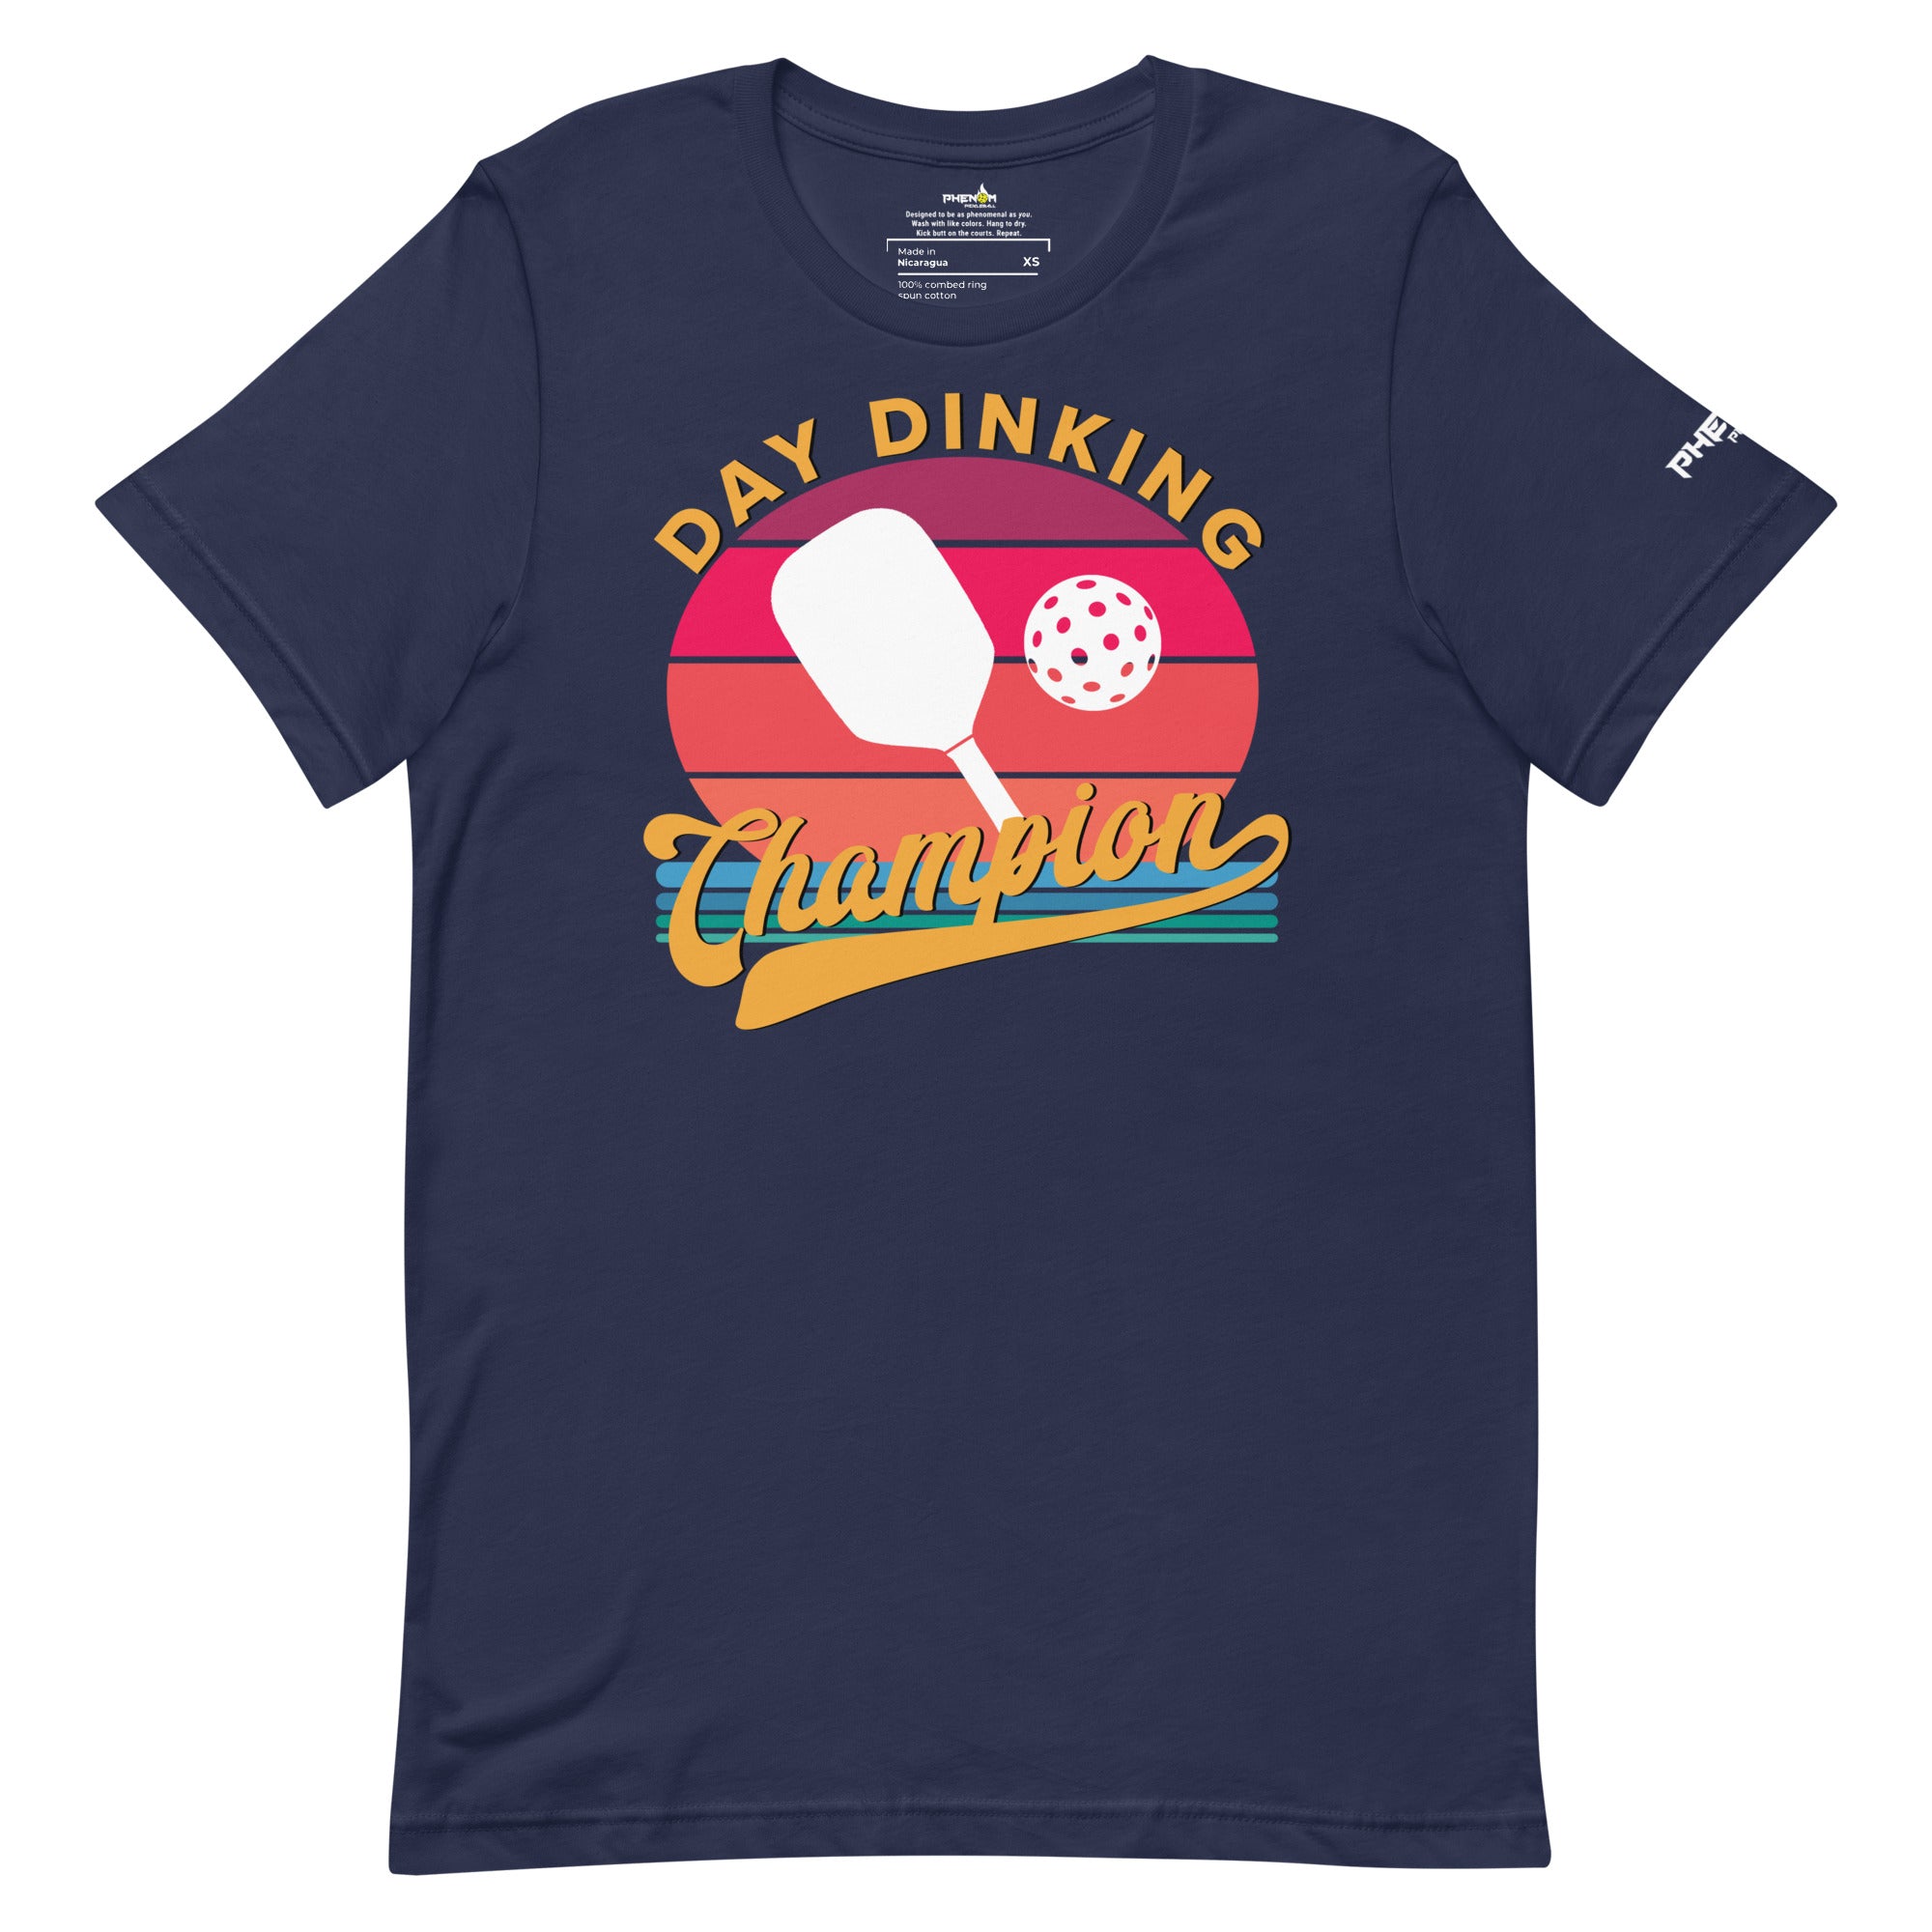 navy blue day dinking champion retro inspired pickleball shirt apparel front view